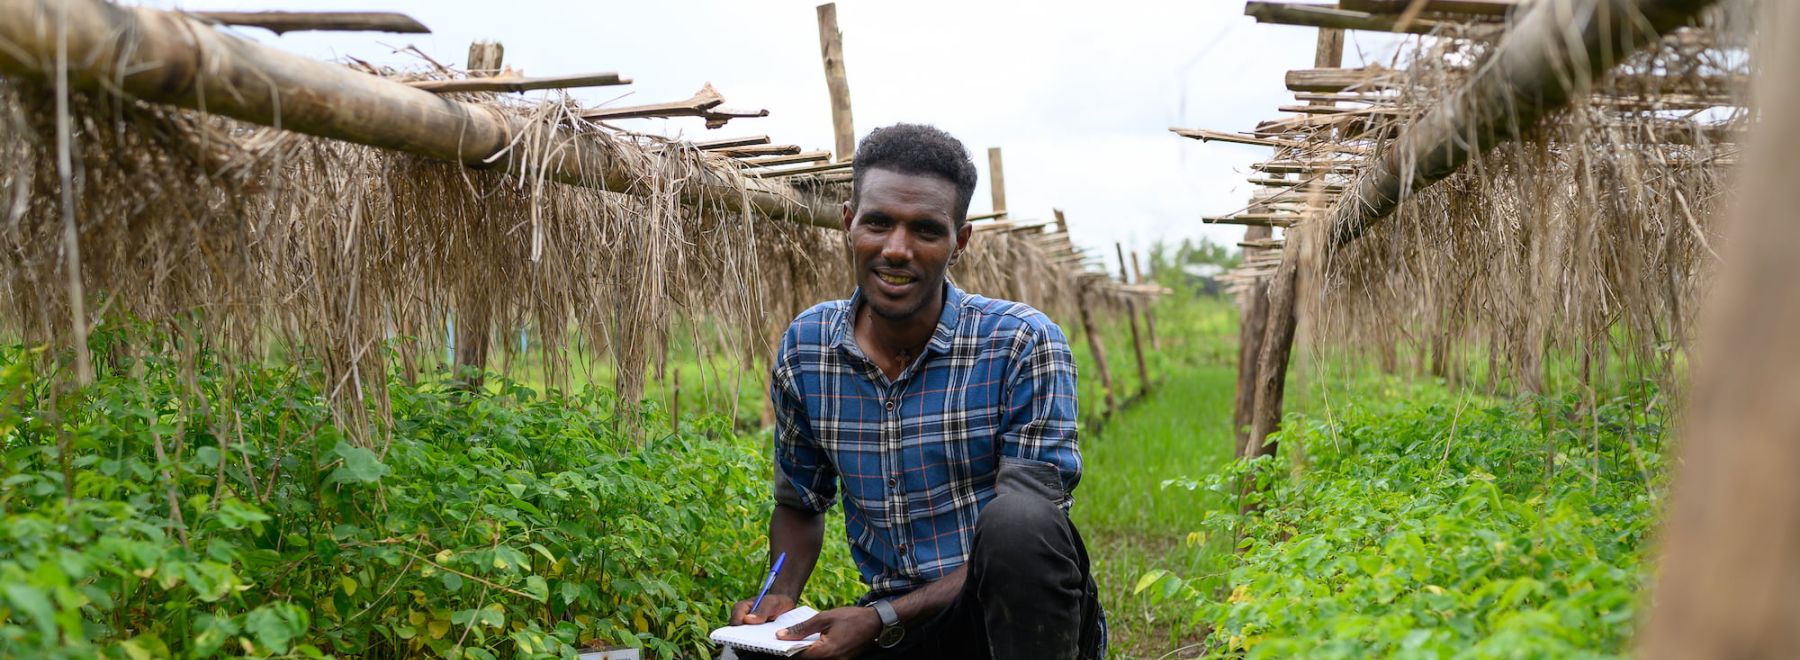 A tree nursery manager in Ethiopia crouches among the tree seedlings